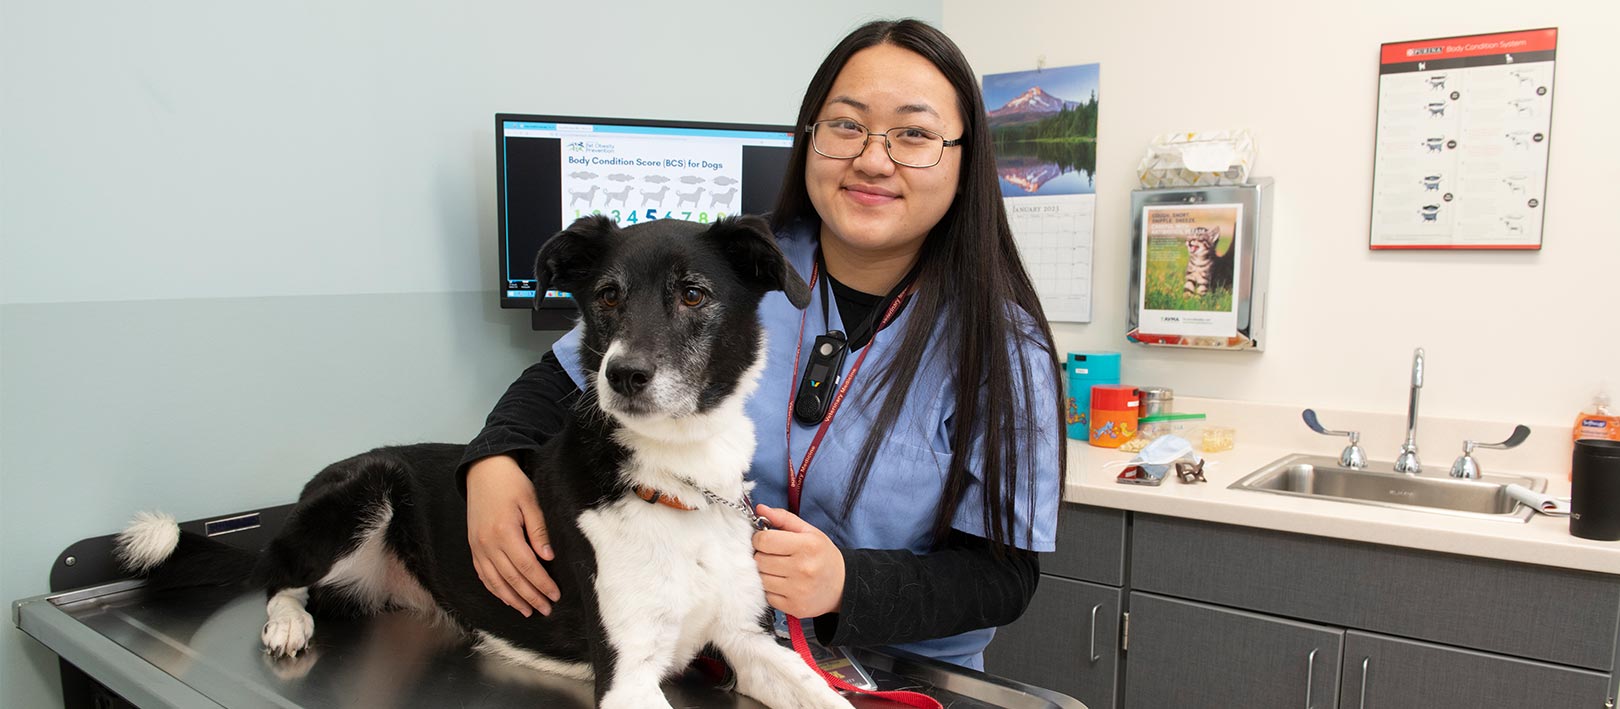 Angelie, a vet tech assistant, and Nigel, a cute black and white dog, in an exam room